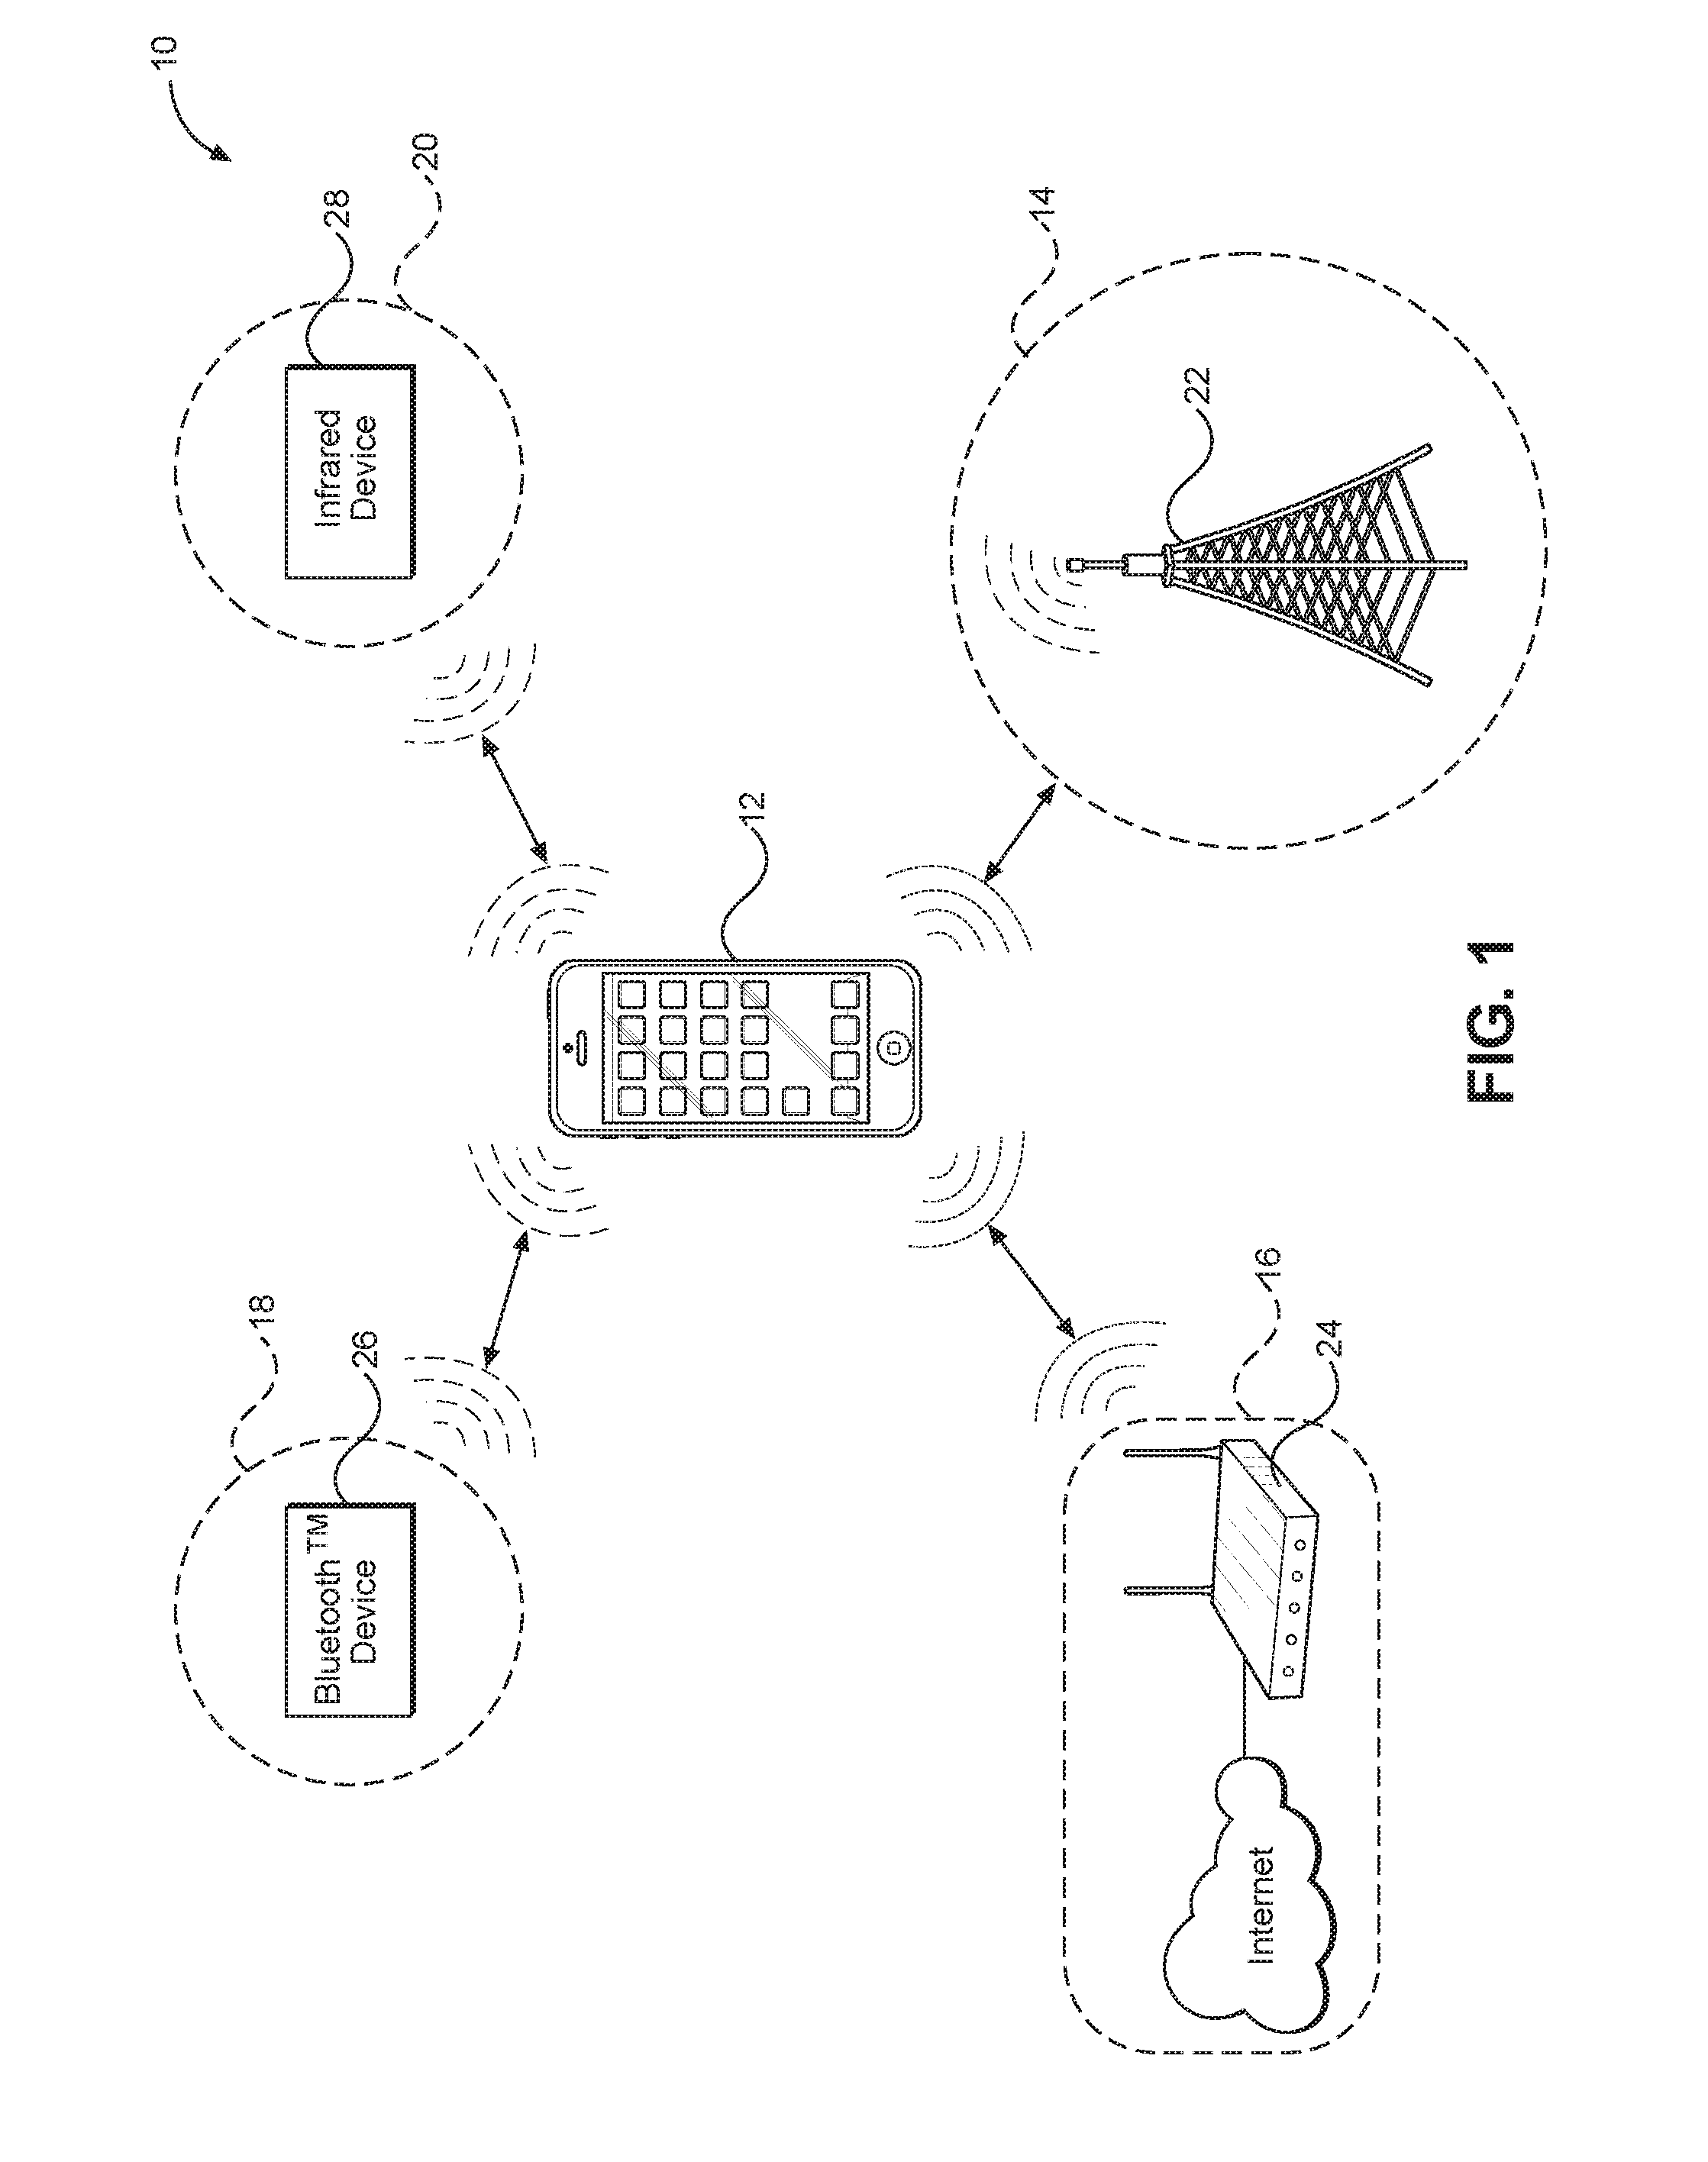 Dynamic interface management for interference mitigation